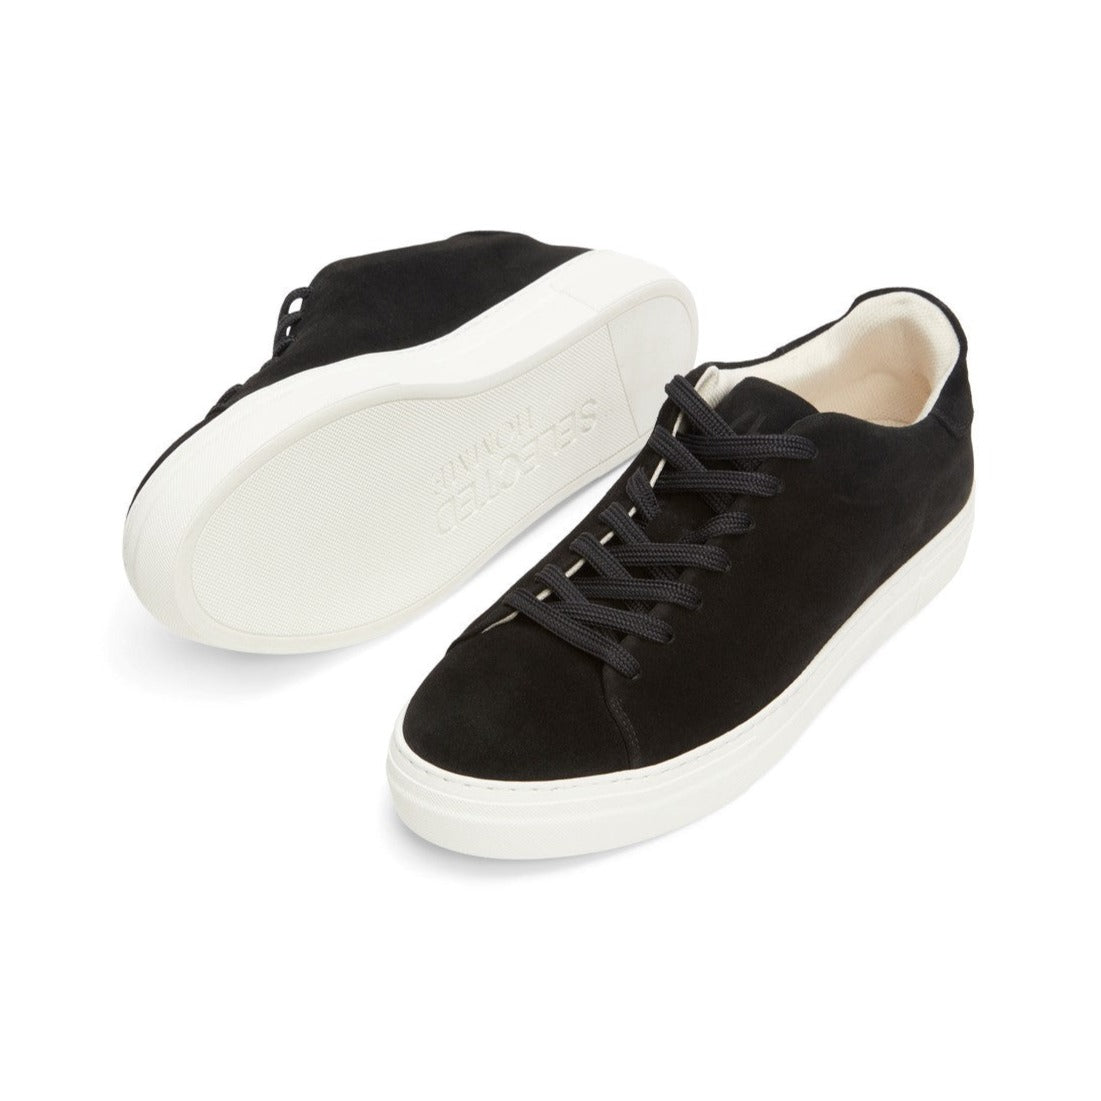 David Chunky Suede Trainer - Black